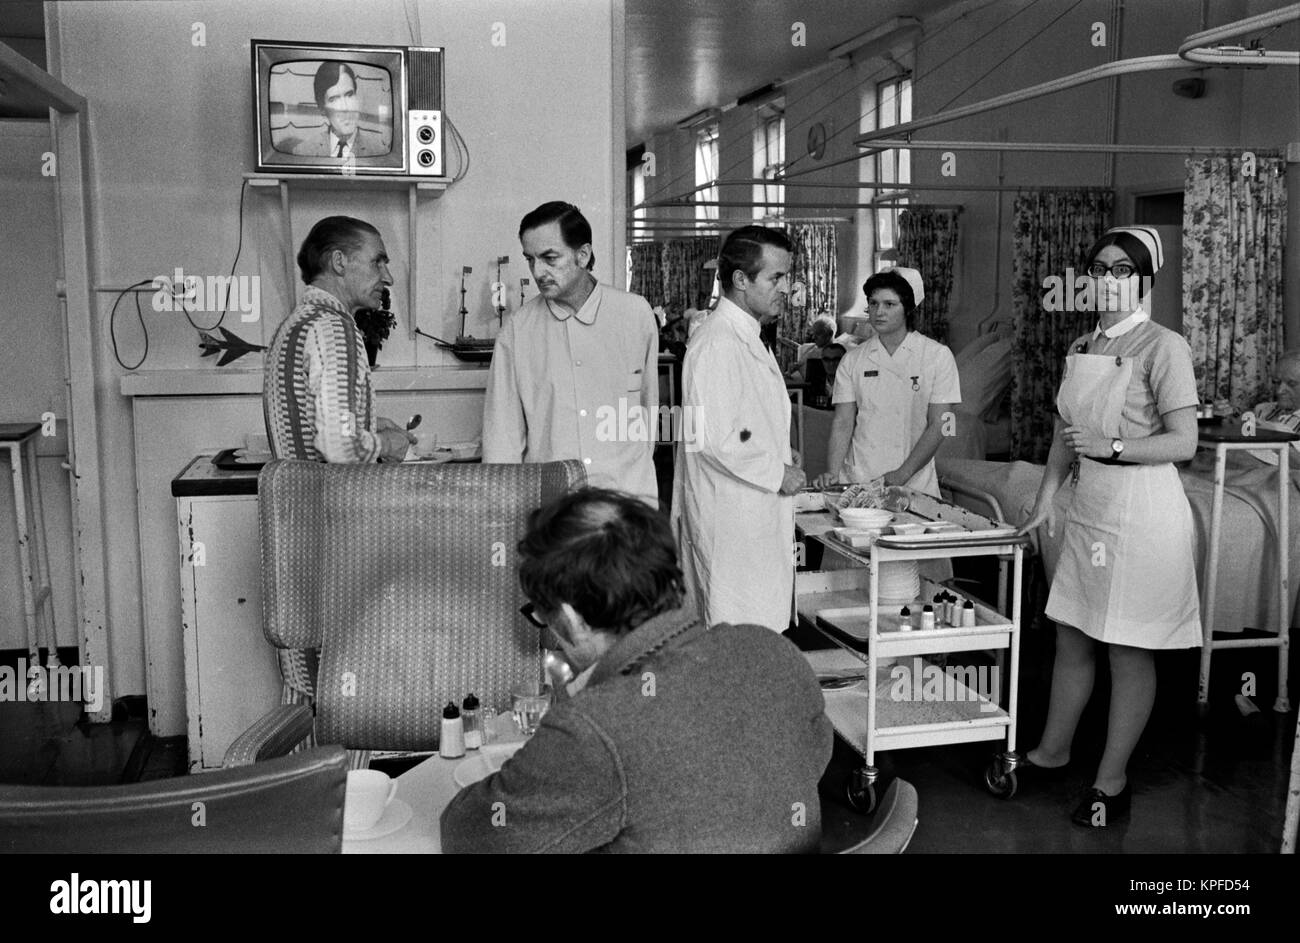 NHS 1970s Uk, doctors Ward Round at Charing Cross Hospital London. Patients allowed to wander around within the ward, eat their meals and watch television.The meal trolley is taken around  the patients by one of the junior nurses. British National Health Service 1972. HOMER SYKES Stock Photo